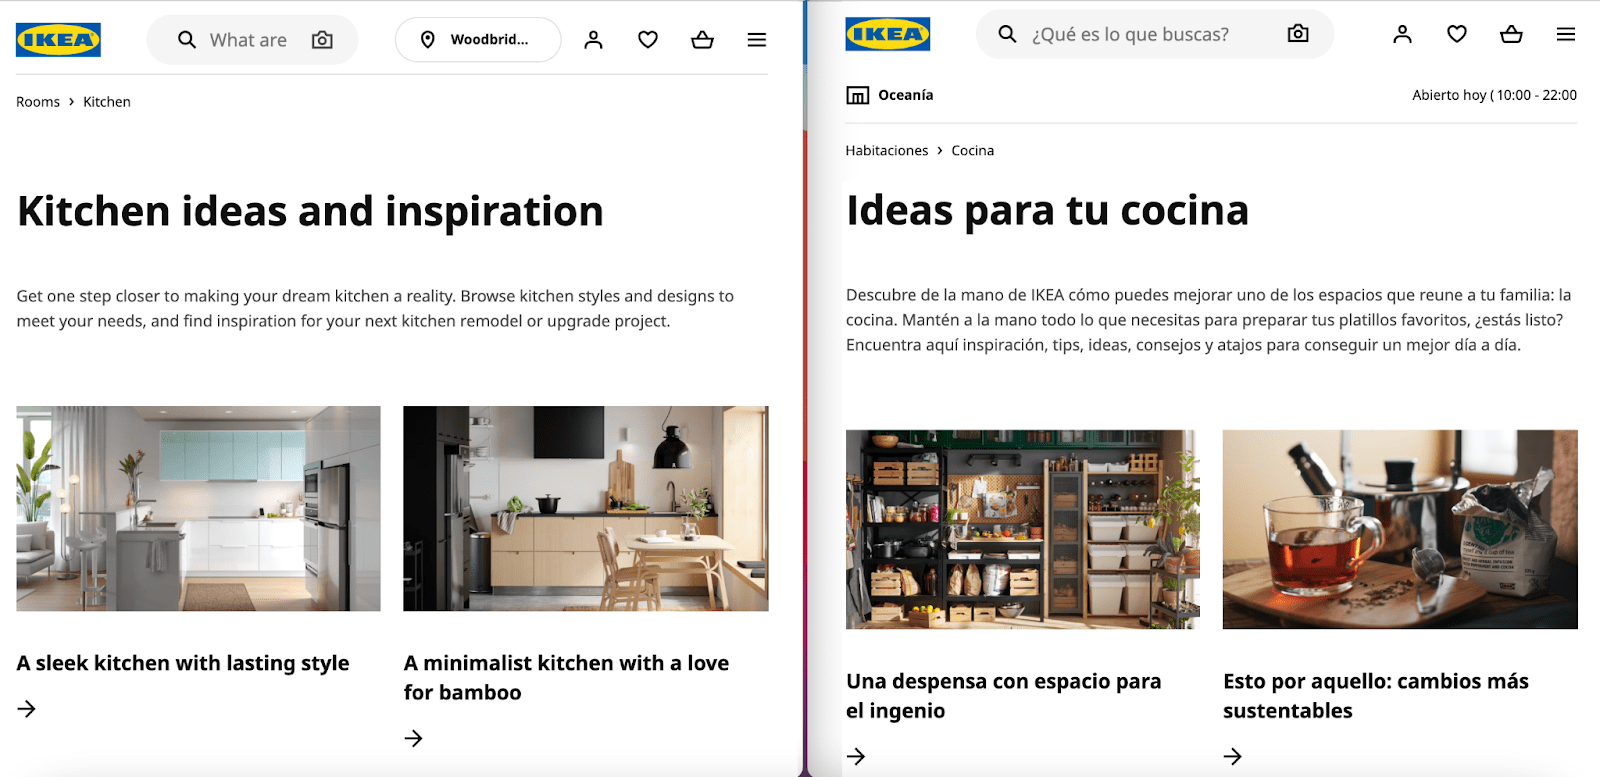 Multilingual site by Ikea